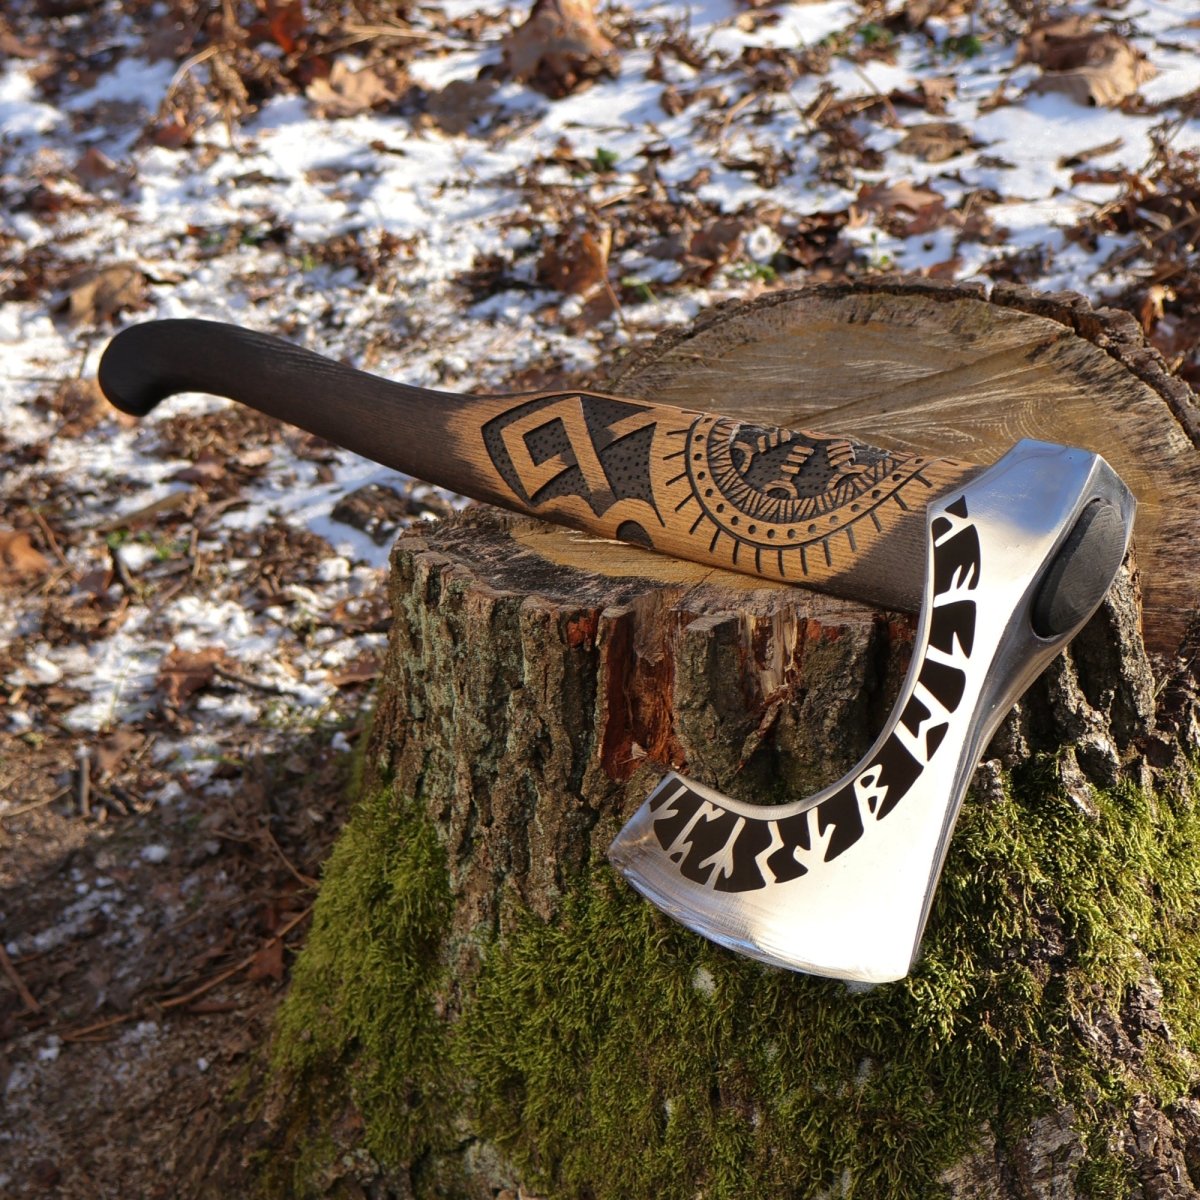 Hand forged axe “OTHALA” with leather cover from AncientSmithy